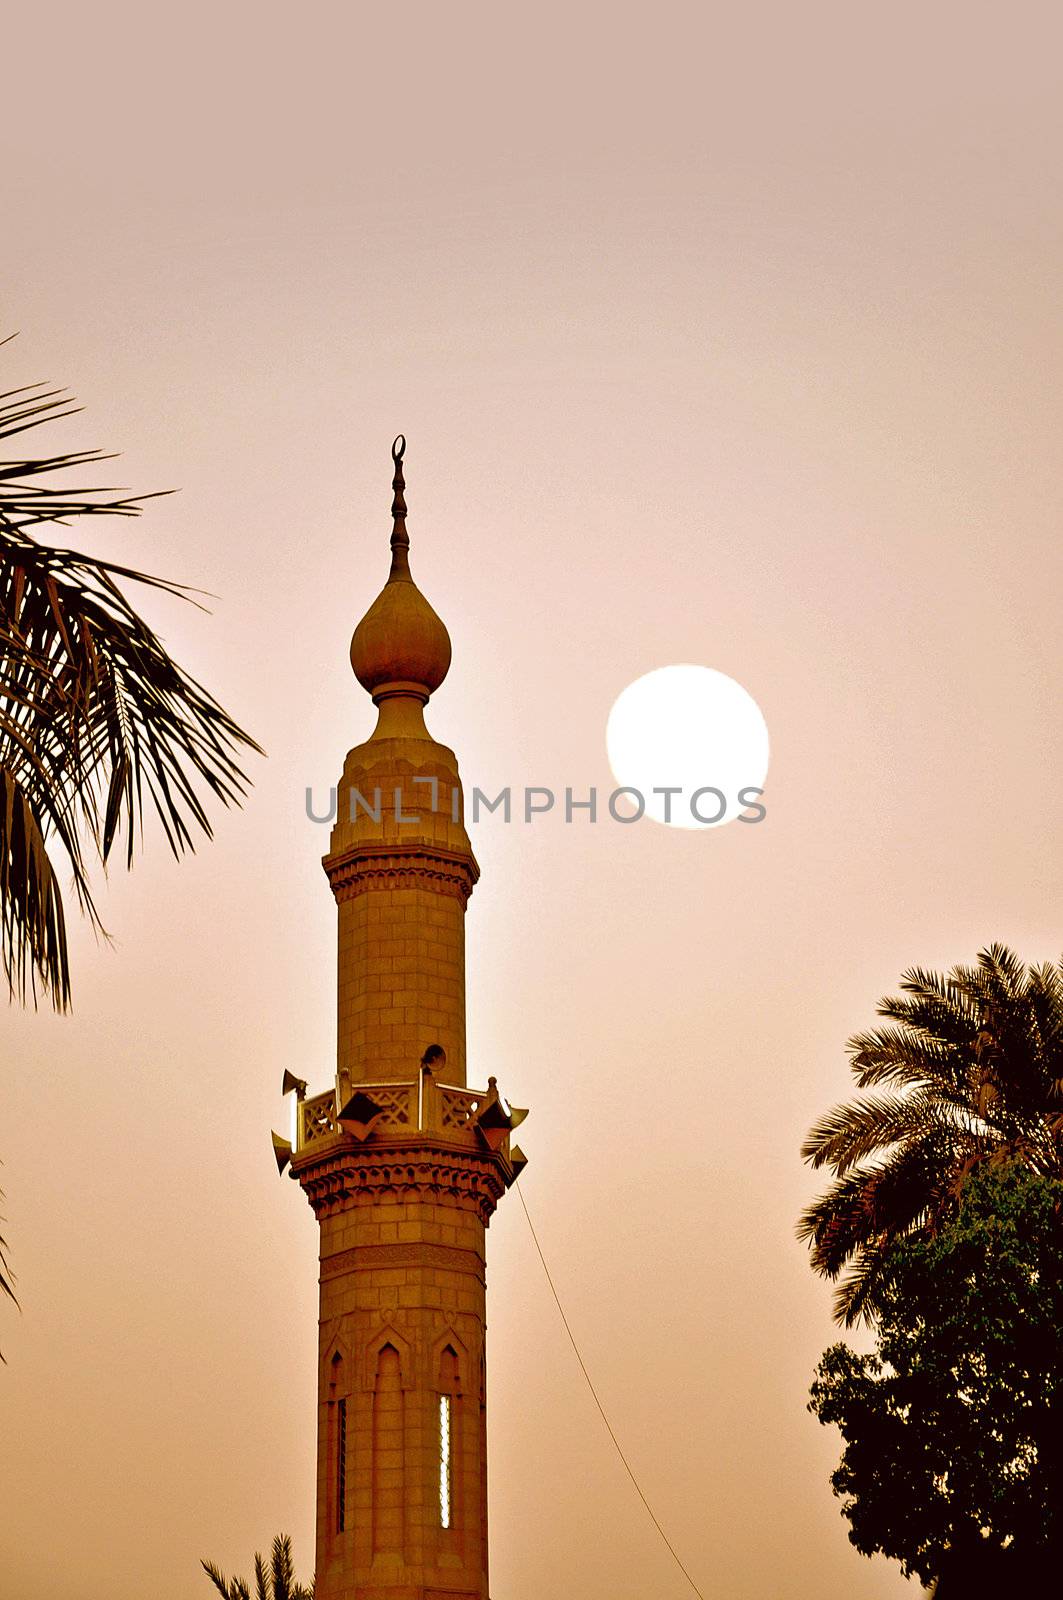 A sepia image of a minaret in Cairo and the moon in the background, sunset